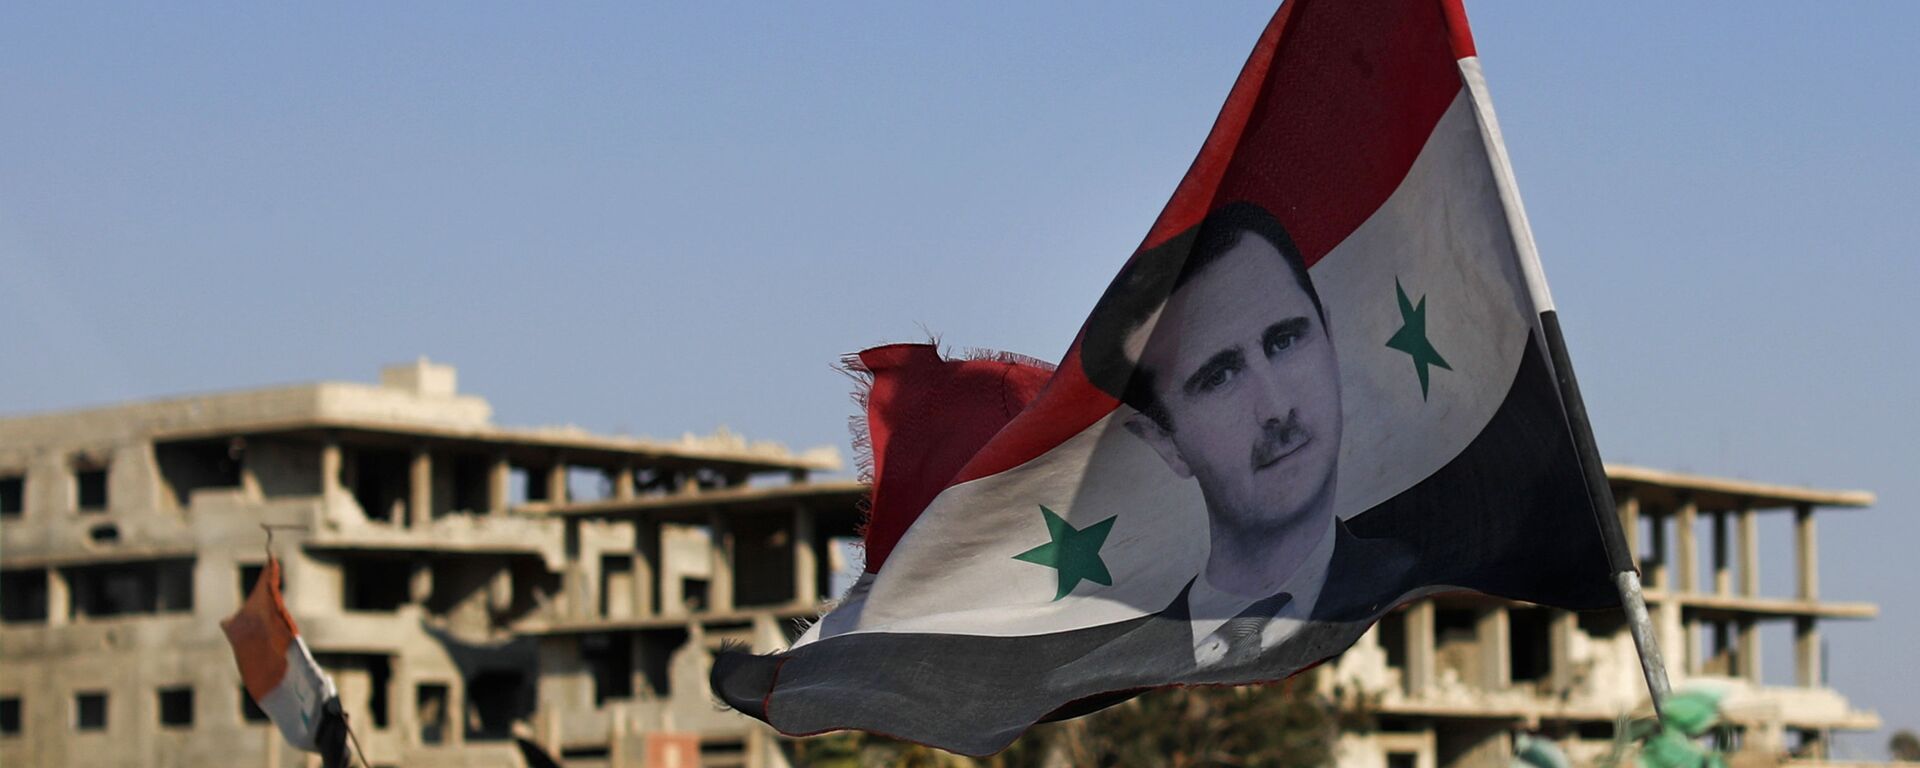 In this July 15, 2018 file photo, a Syrian national flag with a picture of Syrian President Bashar Assad flies at an Army check point, in the town of Douma in the eastern Ghouta region, near Damascus, Syria. - Sputnik International, 1920, 27.02.2021